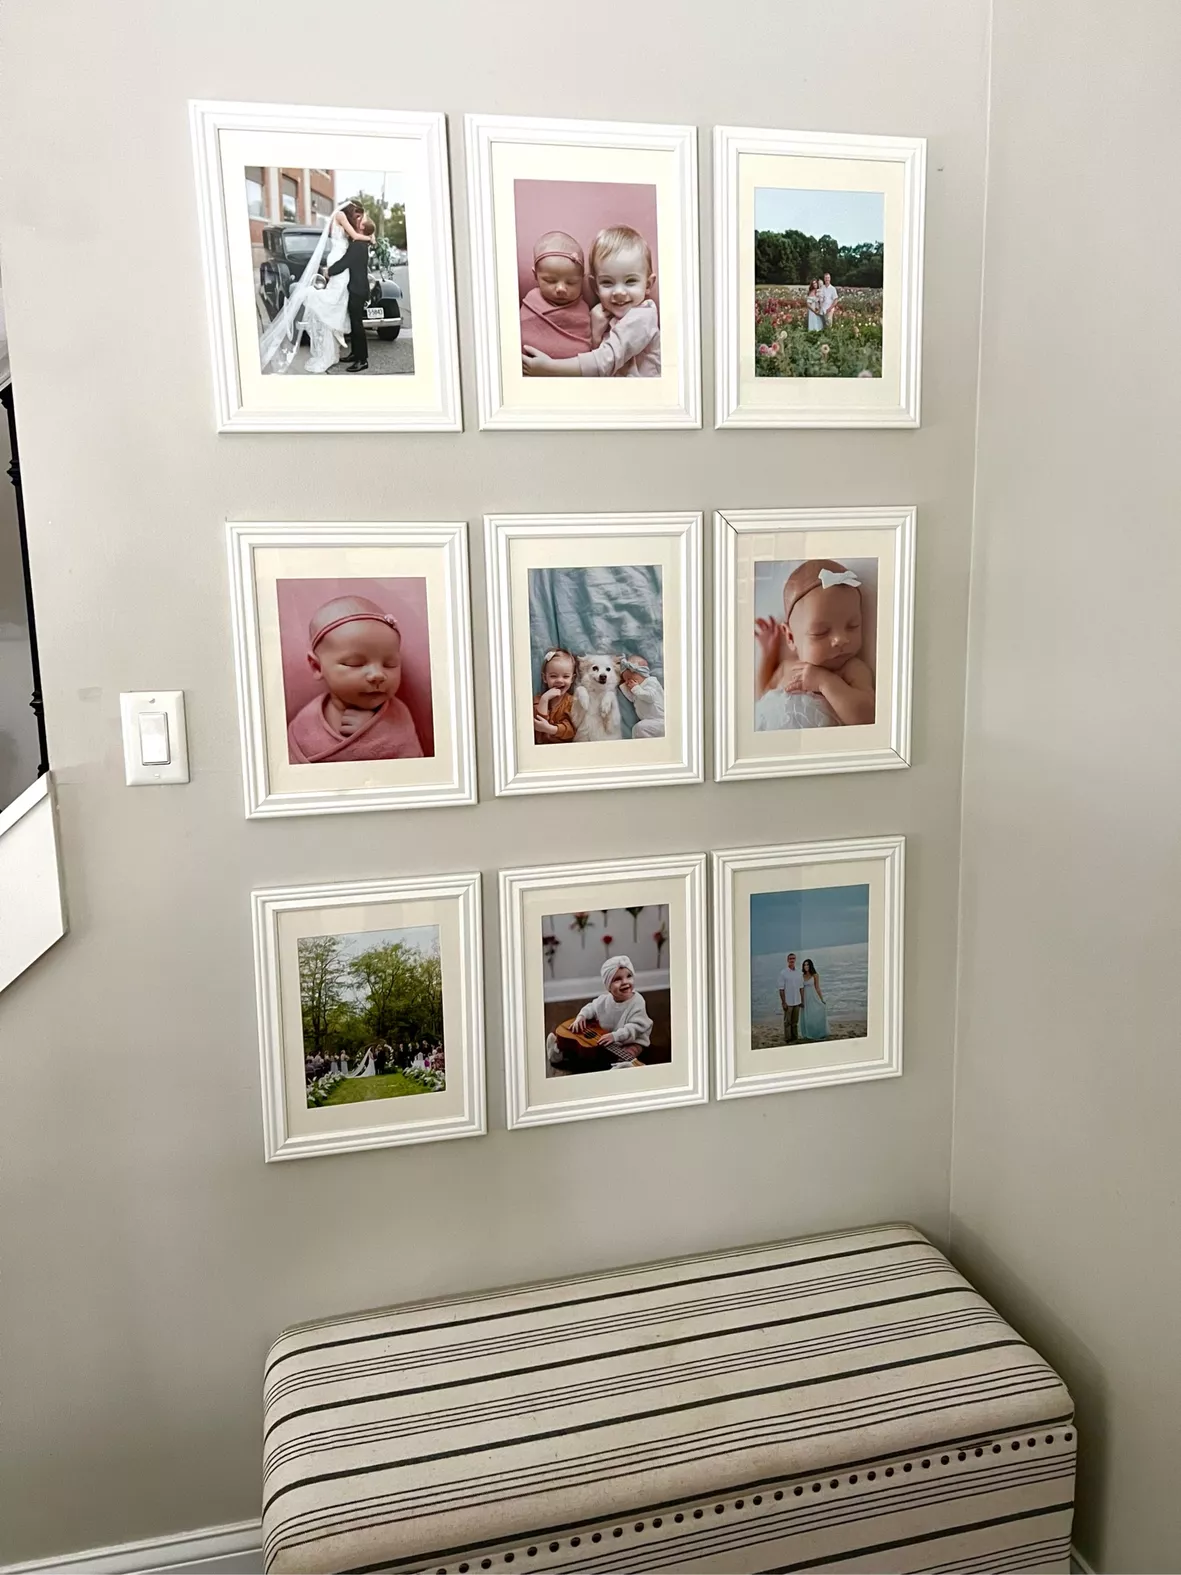 Haus and Hues Set of 3 12x16 White Frames - Picture Frames 12x16